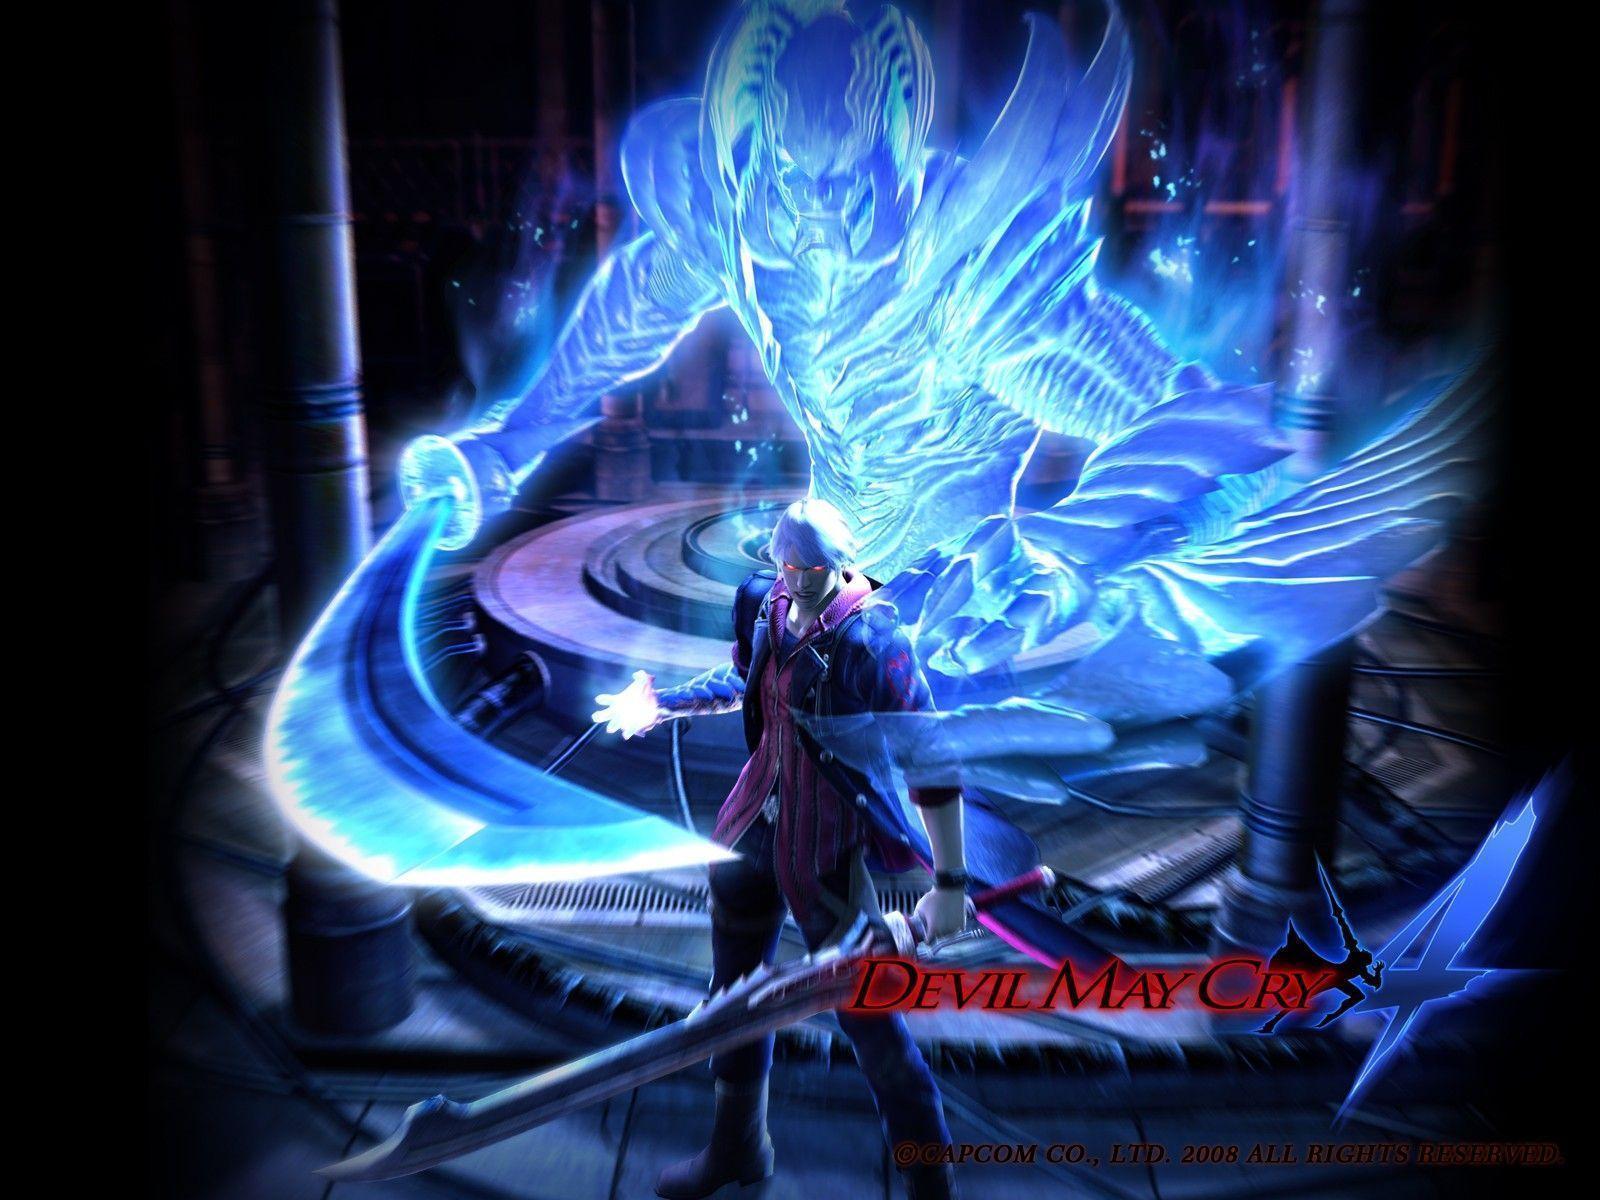 Download Devil May Cry 4 Wallpaper Full Size. Free Game